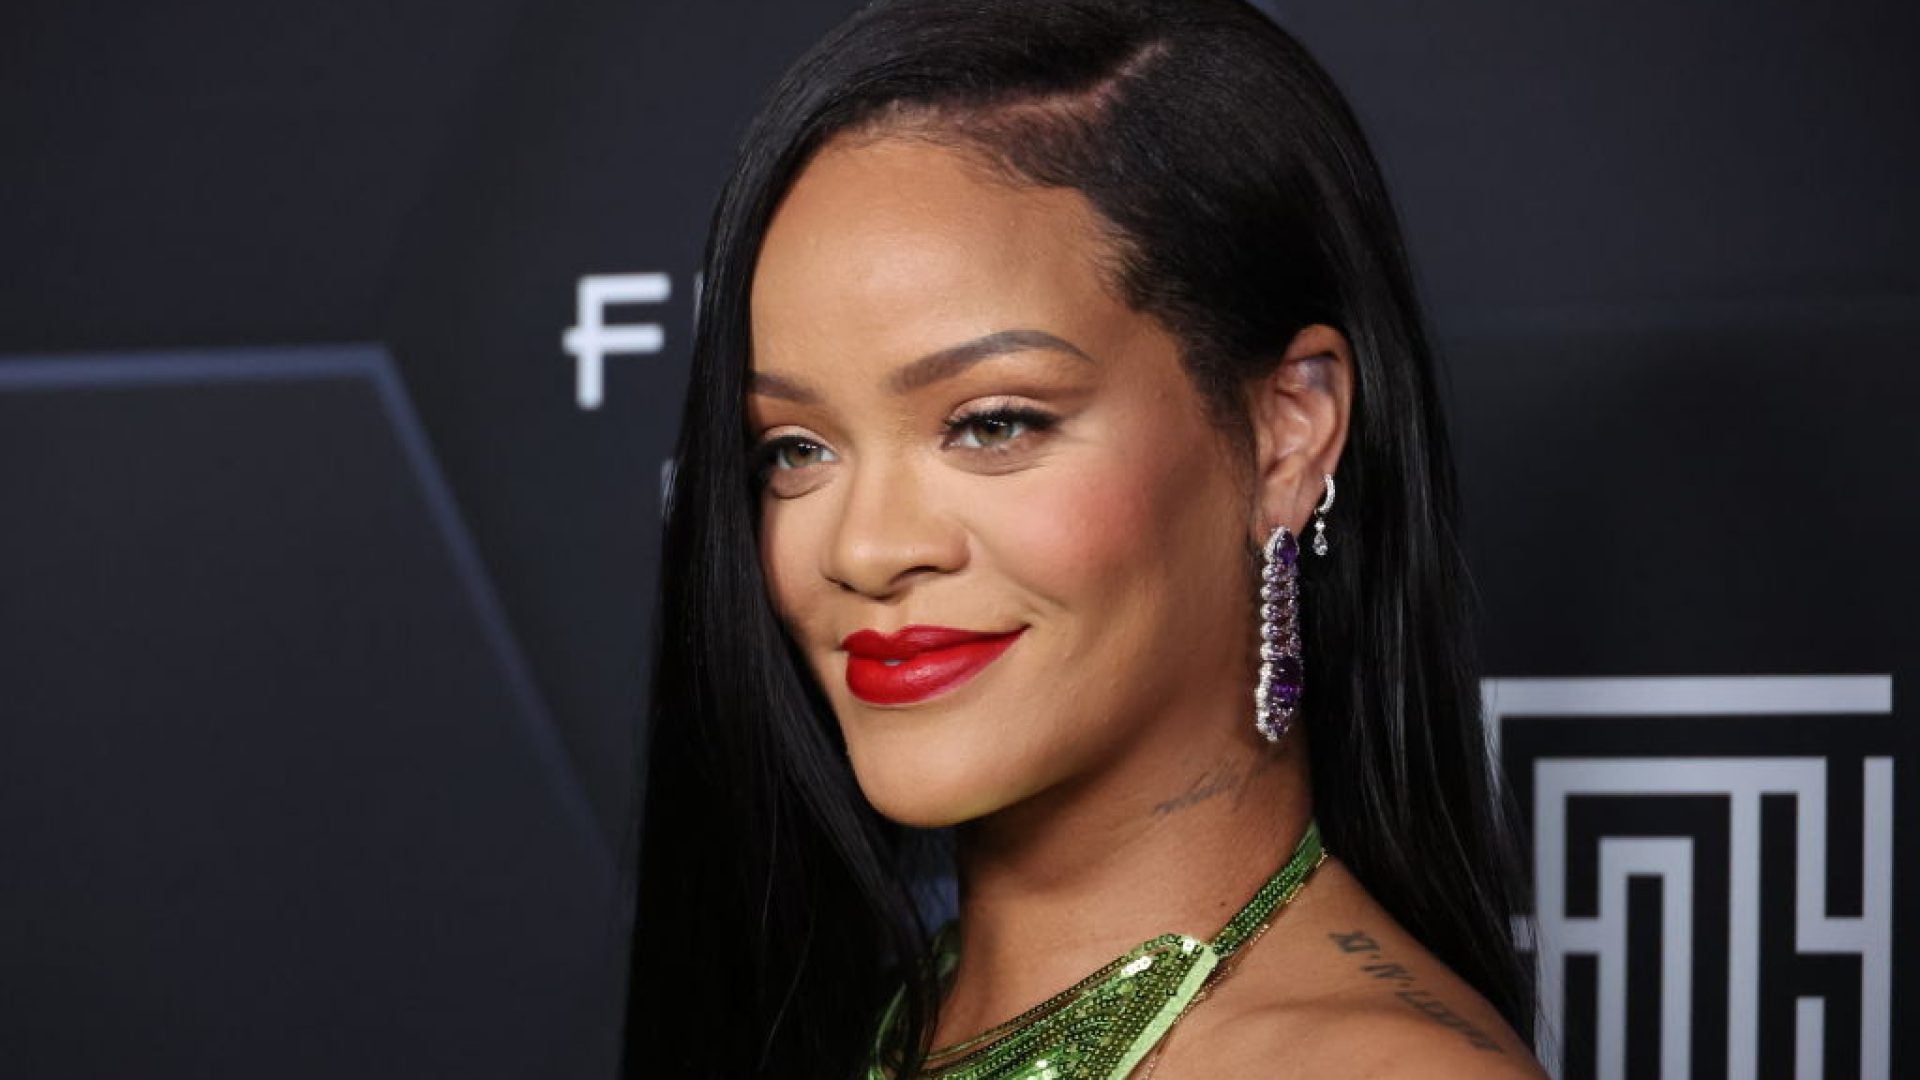 Rihanna Went Baby Shopping At Target And Here's What She Threw In Her Cart (And What She Should Have)